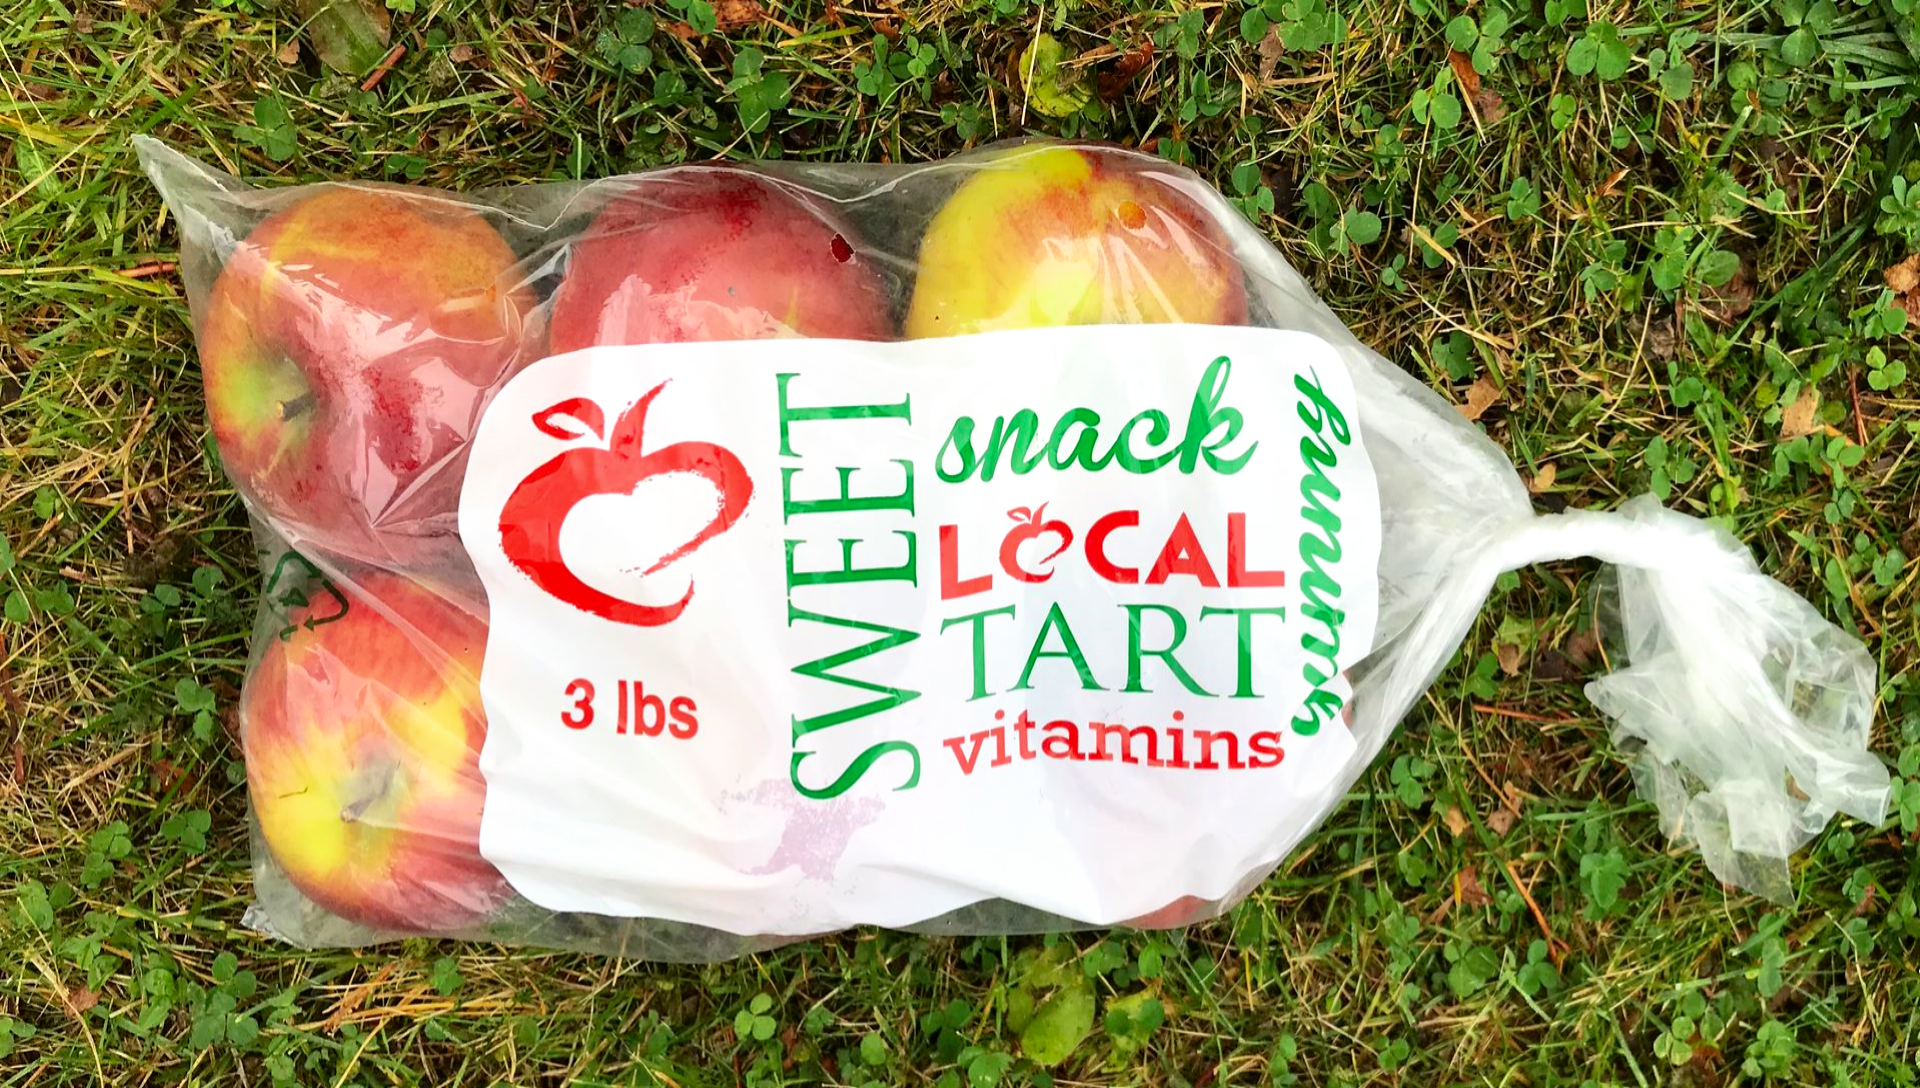 Apples in a Bag stock photo. Image of health, groceries - 23316364